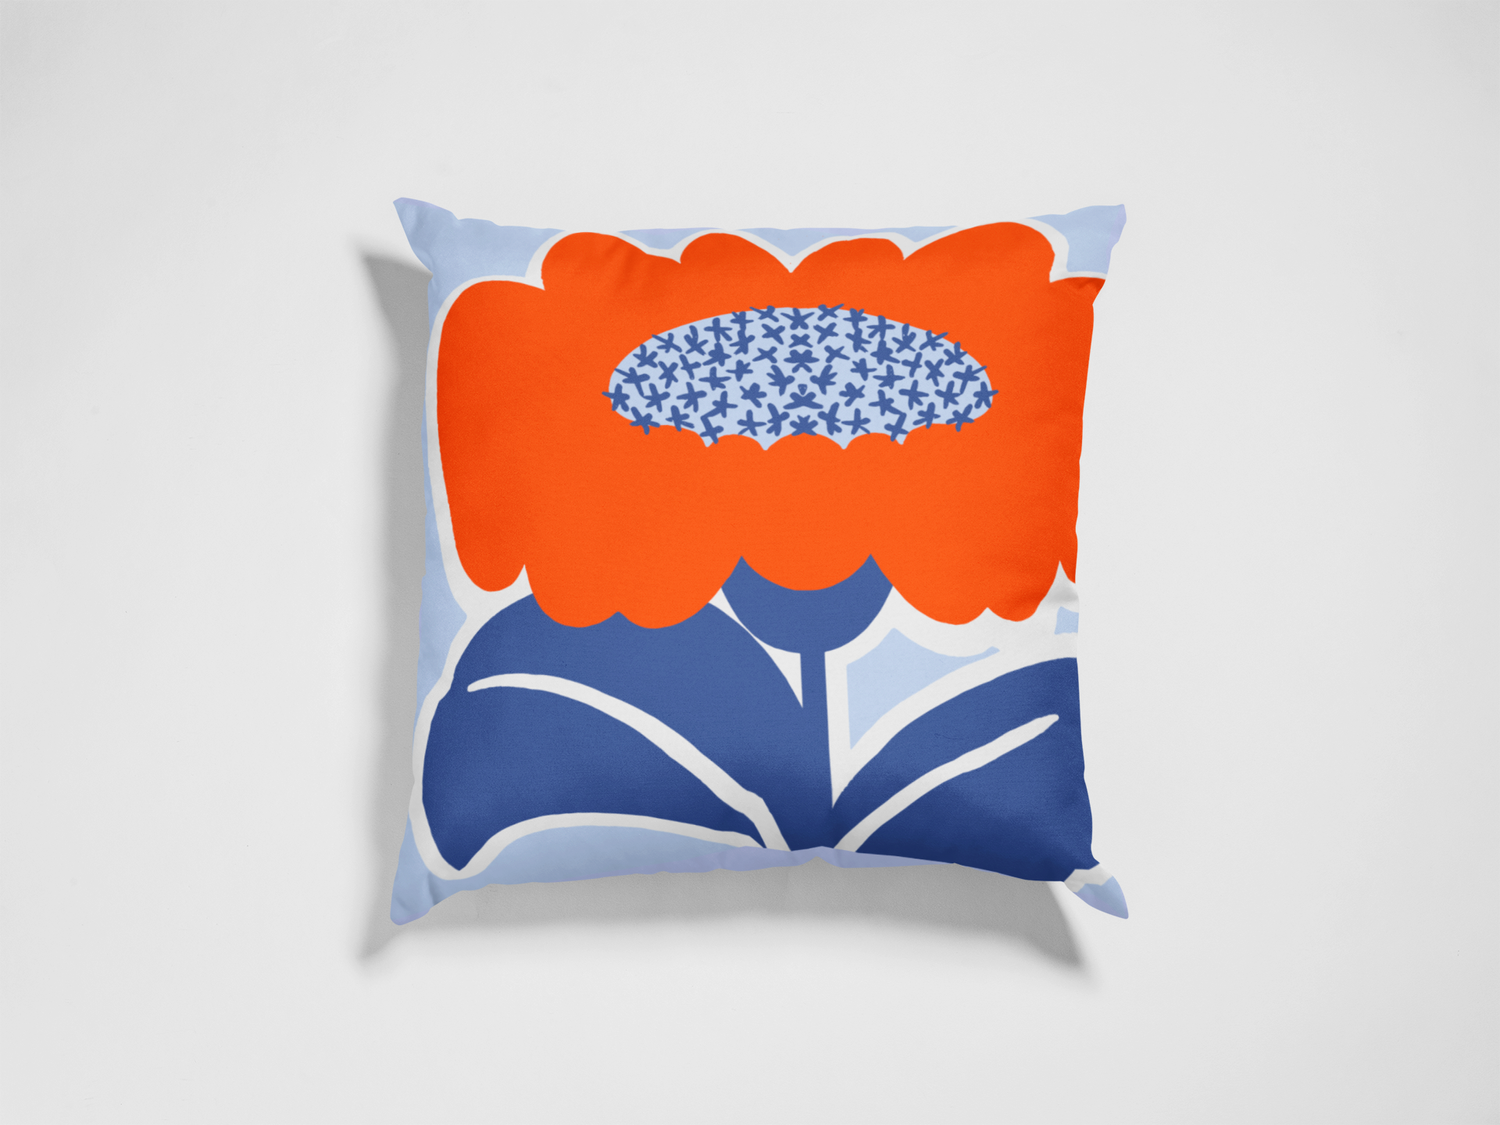 New! July 4th Red, White And Blue Big Daisy Design Retro Modern